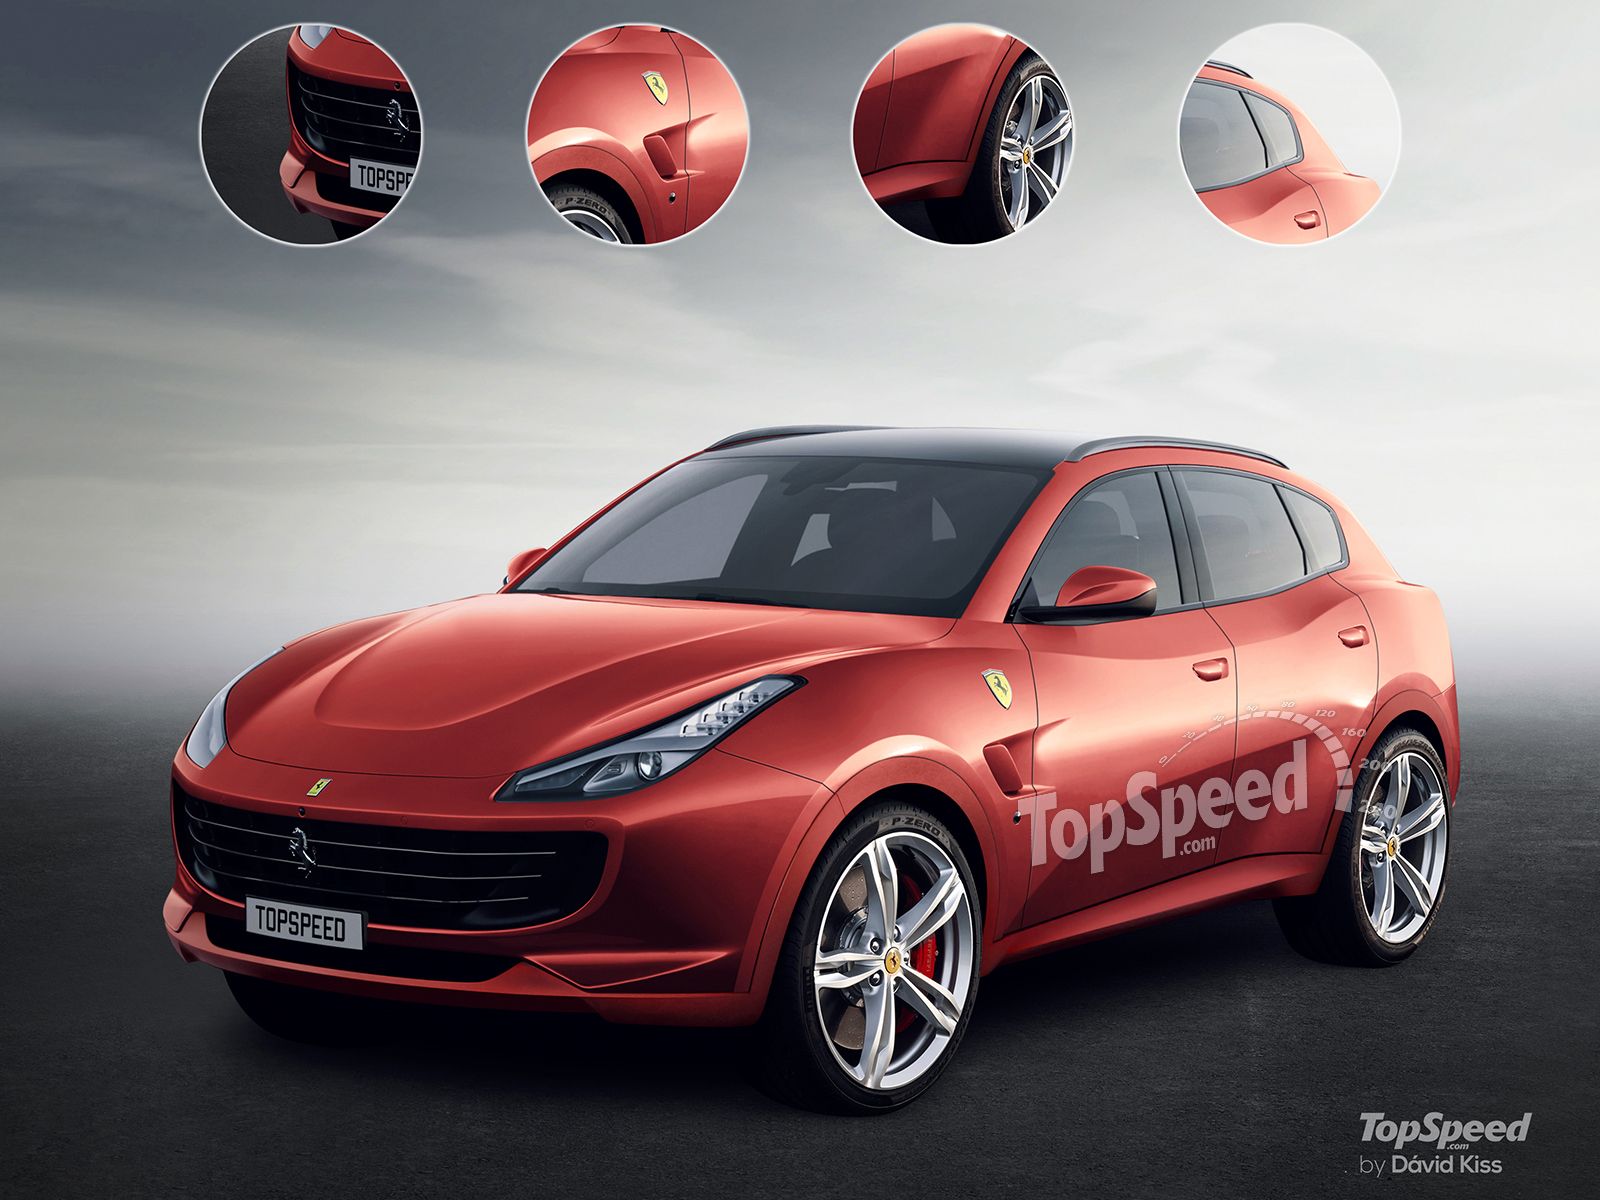 2020 - 2022 The Ferrari Purosangue Is Scheduled to Arrive in 2021 and It May Even Pack a V-12 After All